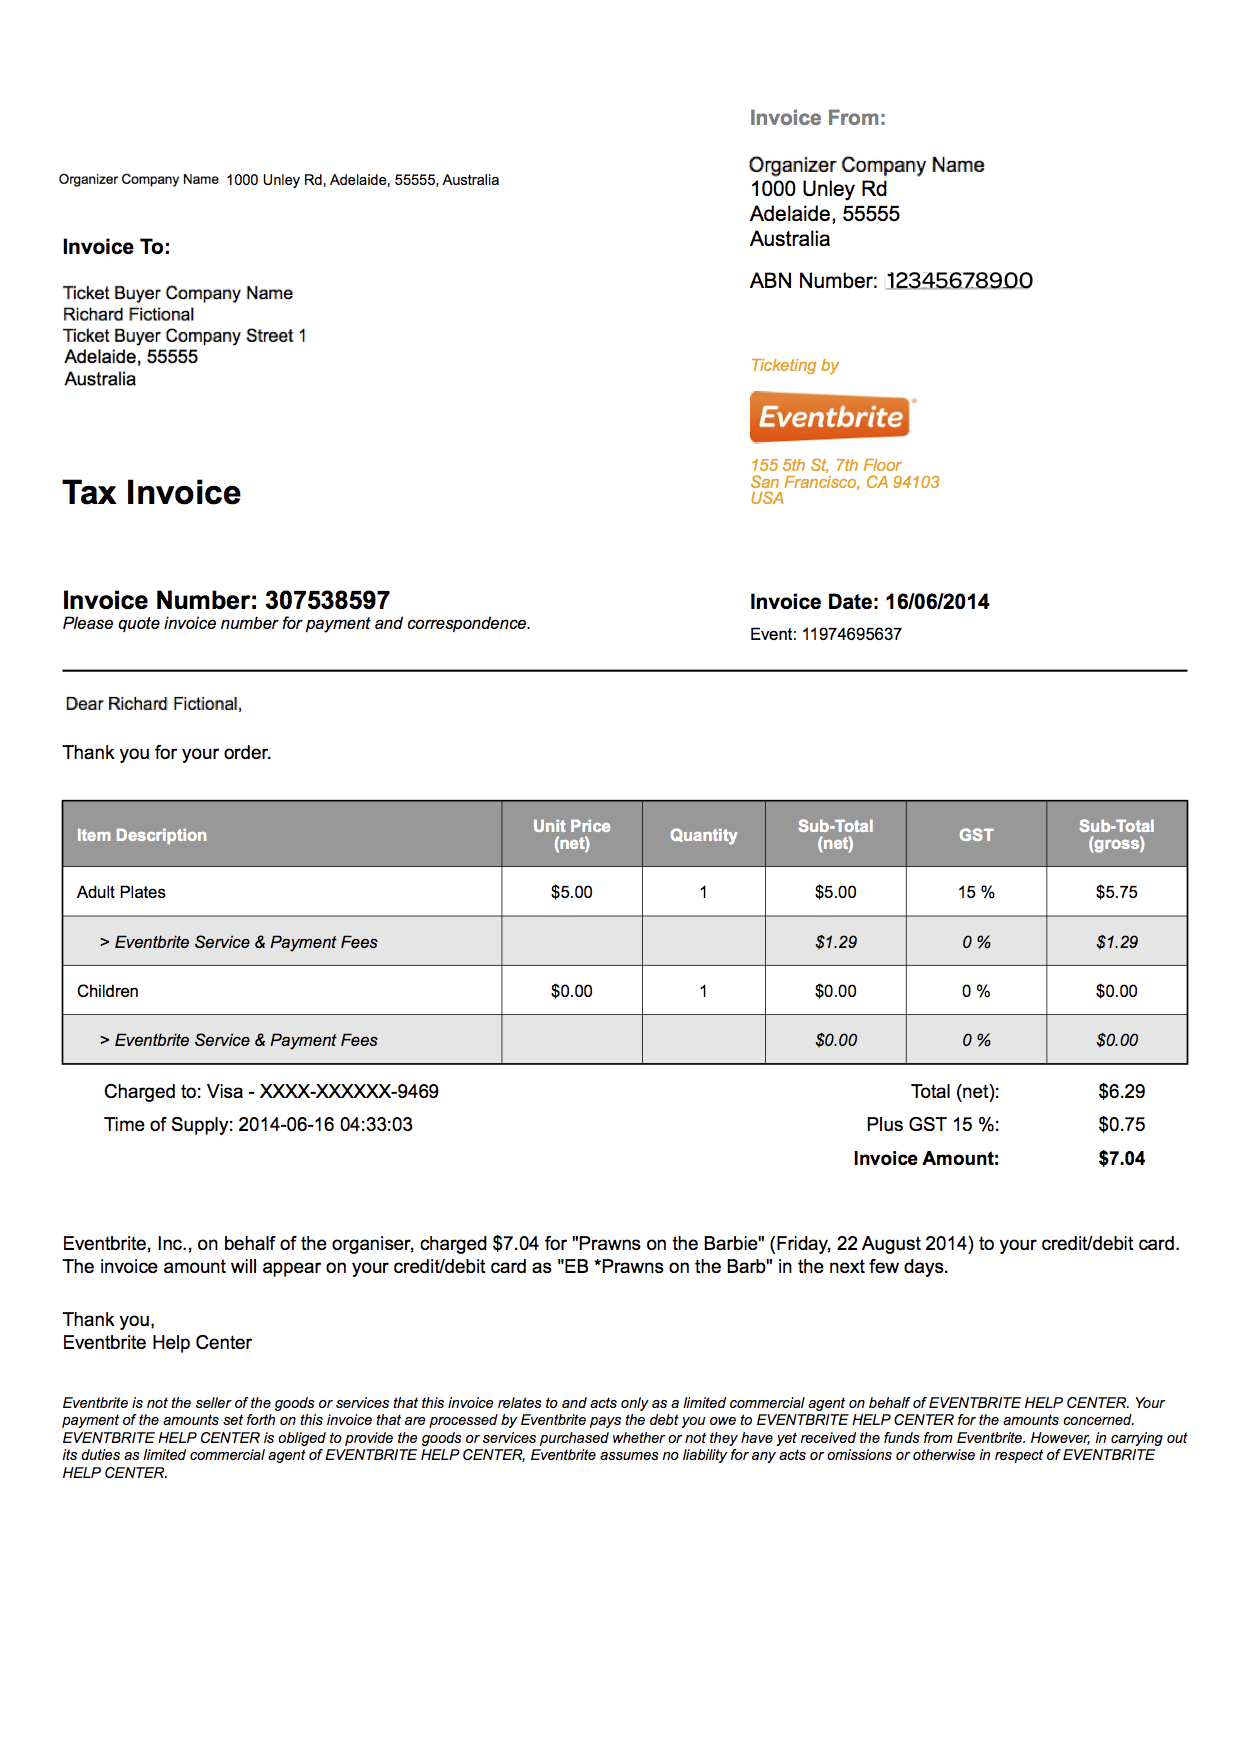 View Non Gst Invoice Template Nz Background